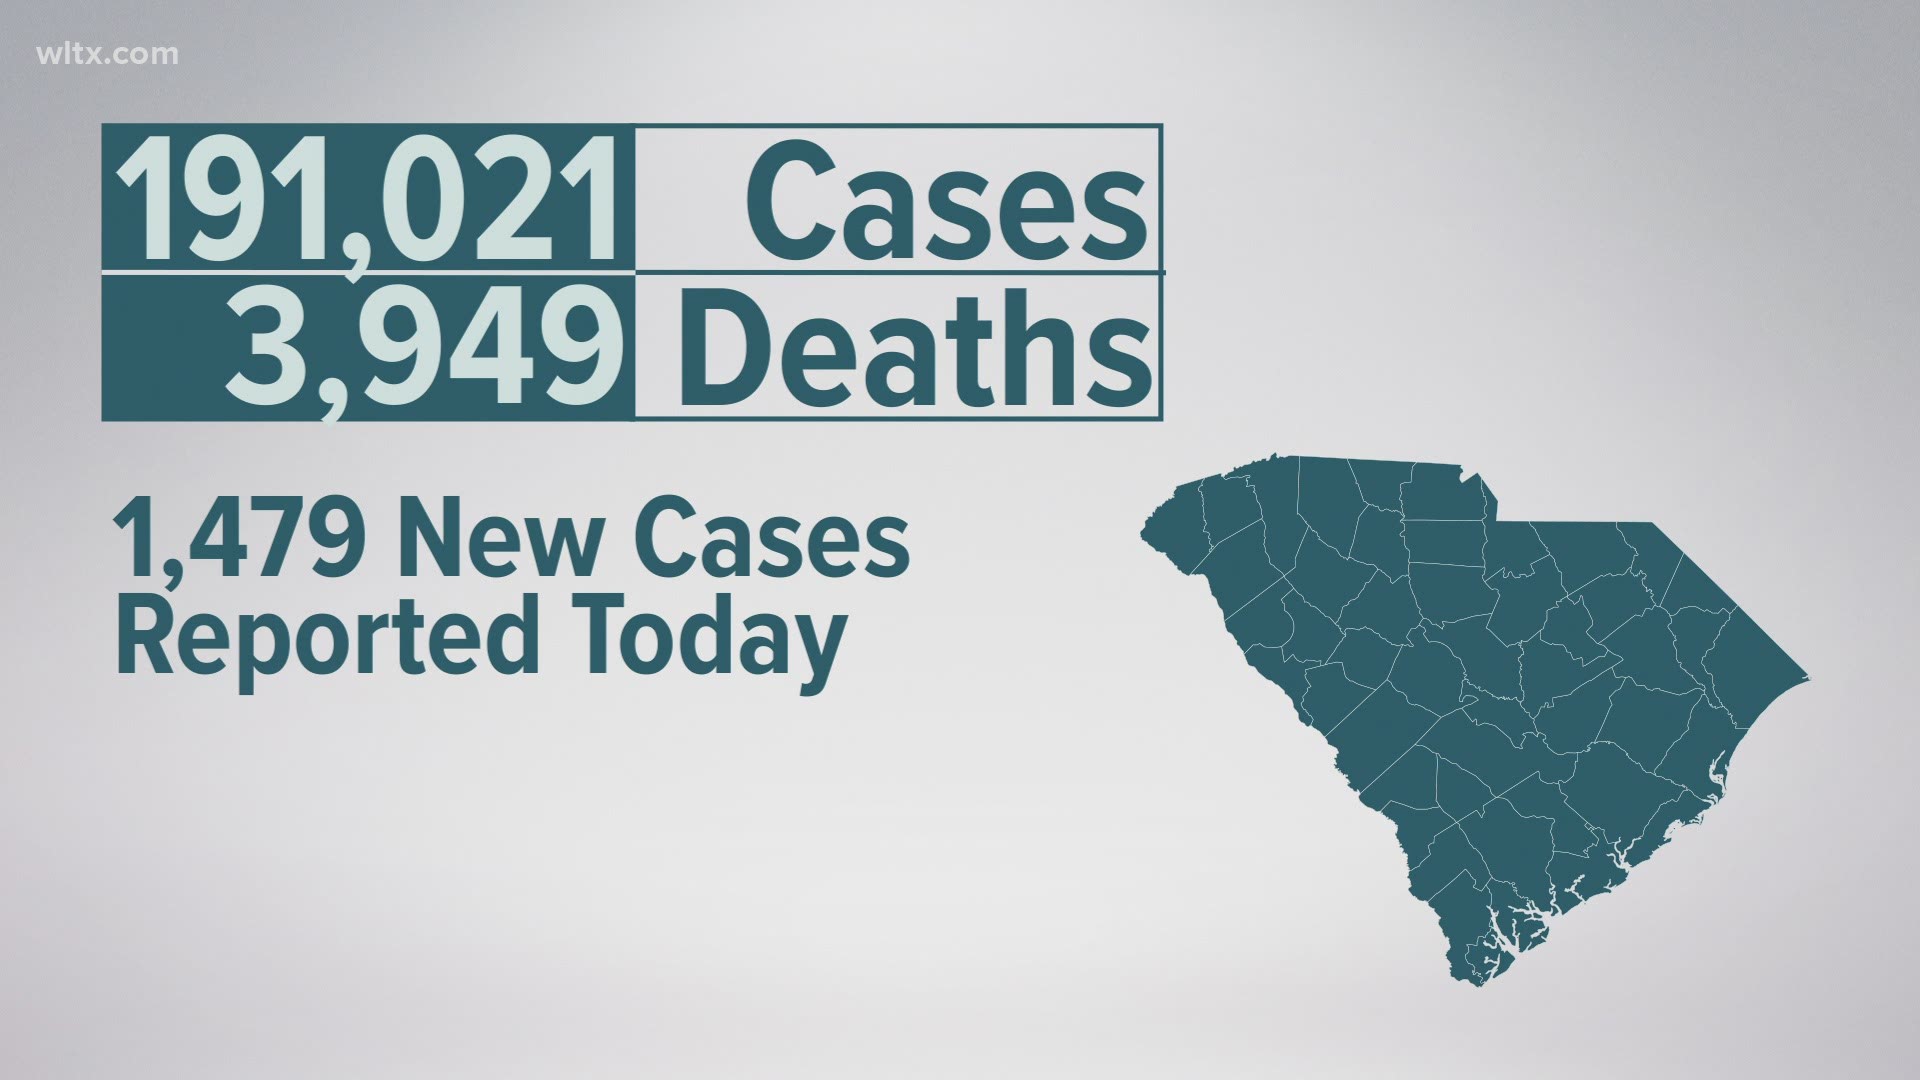 This brings the total number of confirmed cases to  191,021,  probable cases to 12,140, confirmed deaths to 3,949 and 282 probable deaths.